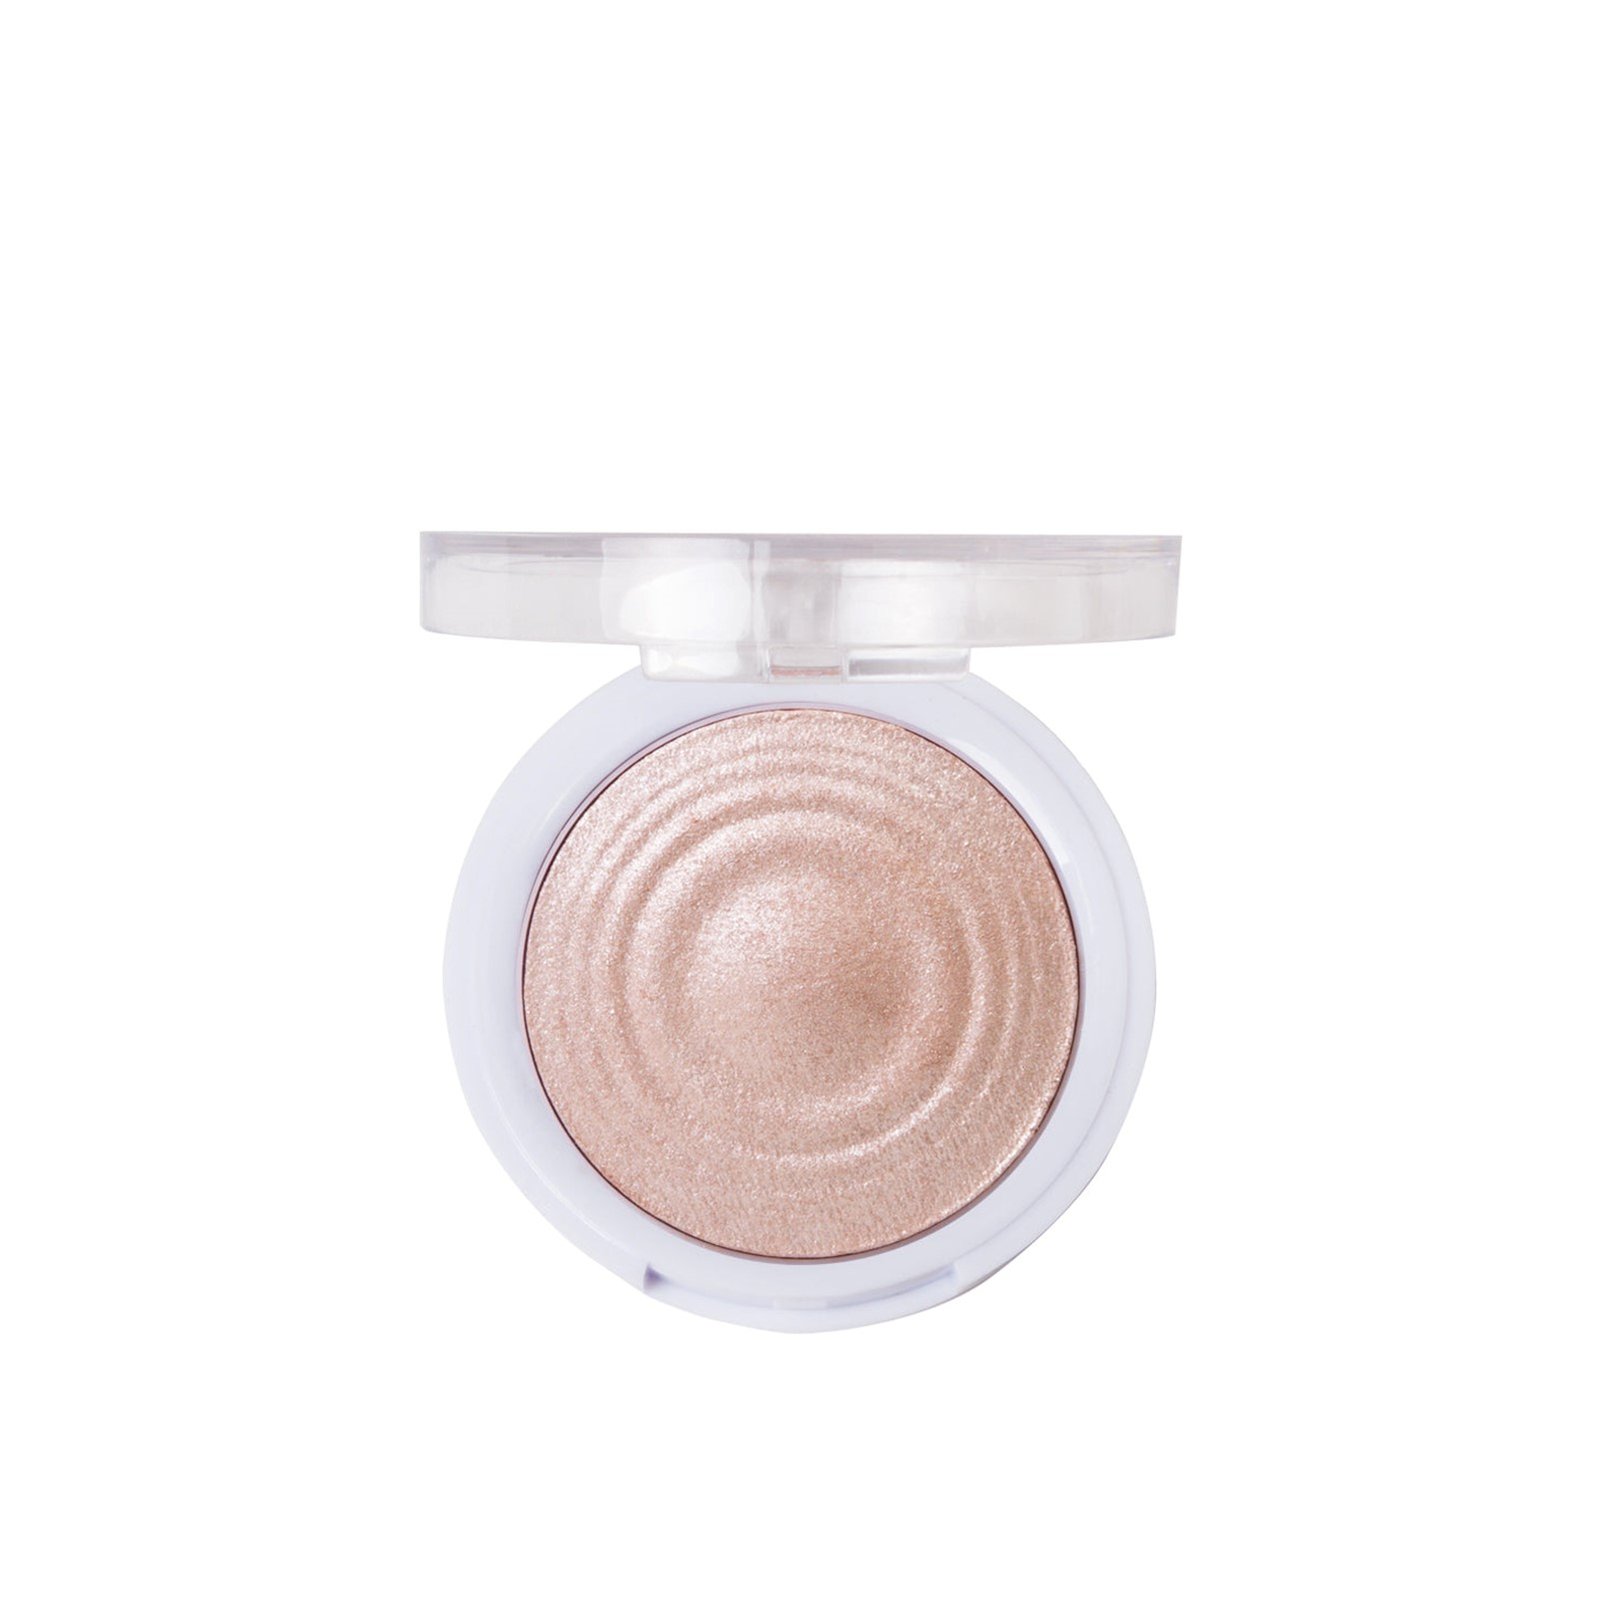 J.Cat You Glow Girl Baked Highlighter 104 Crystal Sand 8.5g